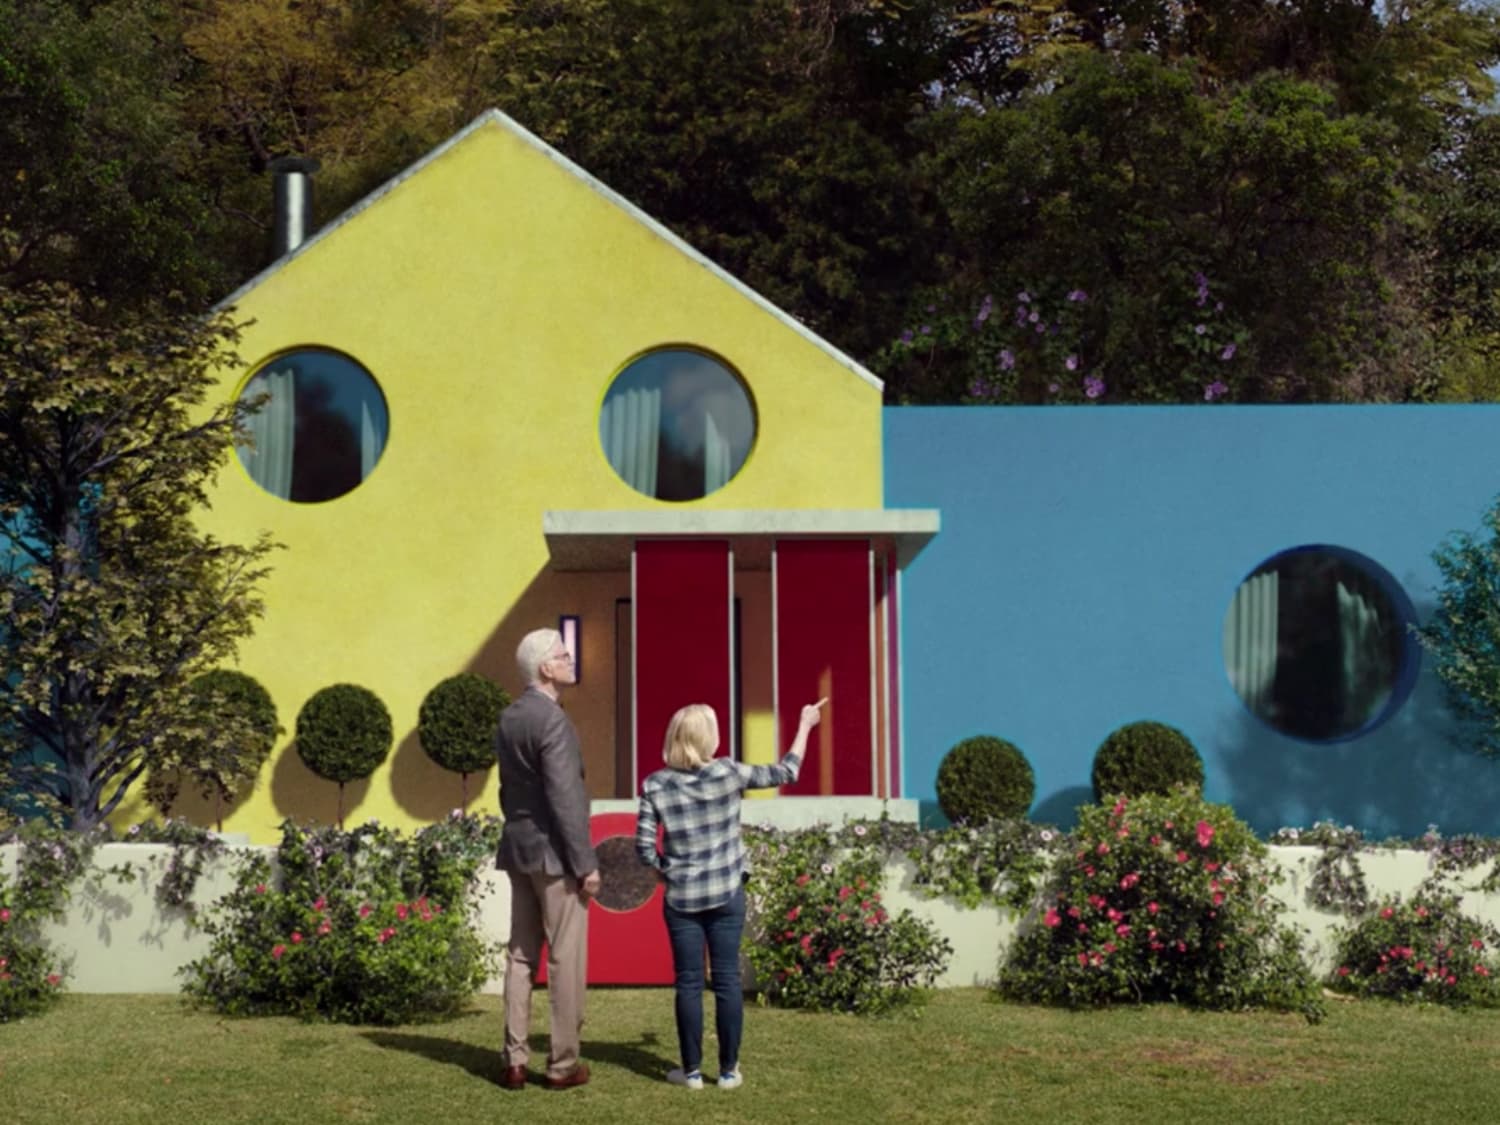 The Good Place Has Me Imagining What My Afterlife House